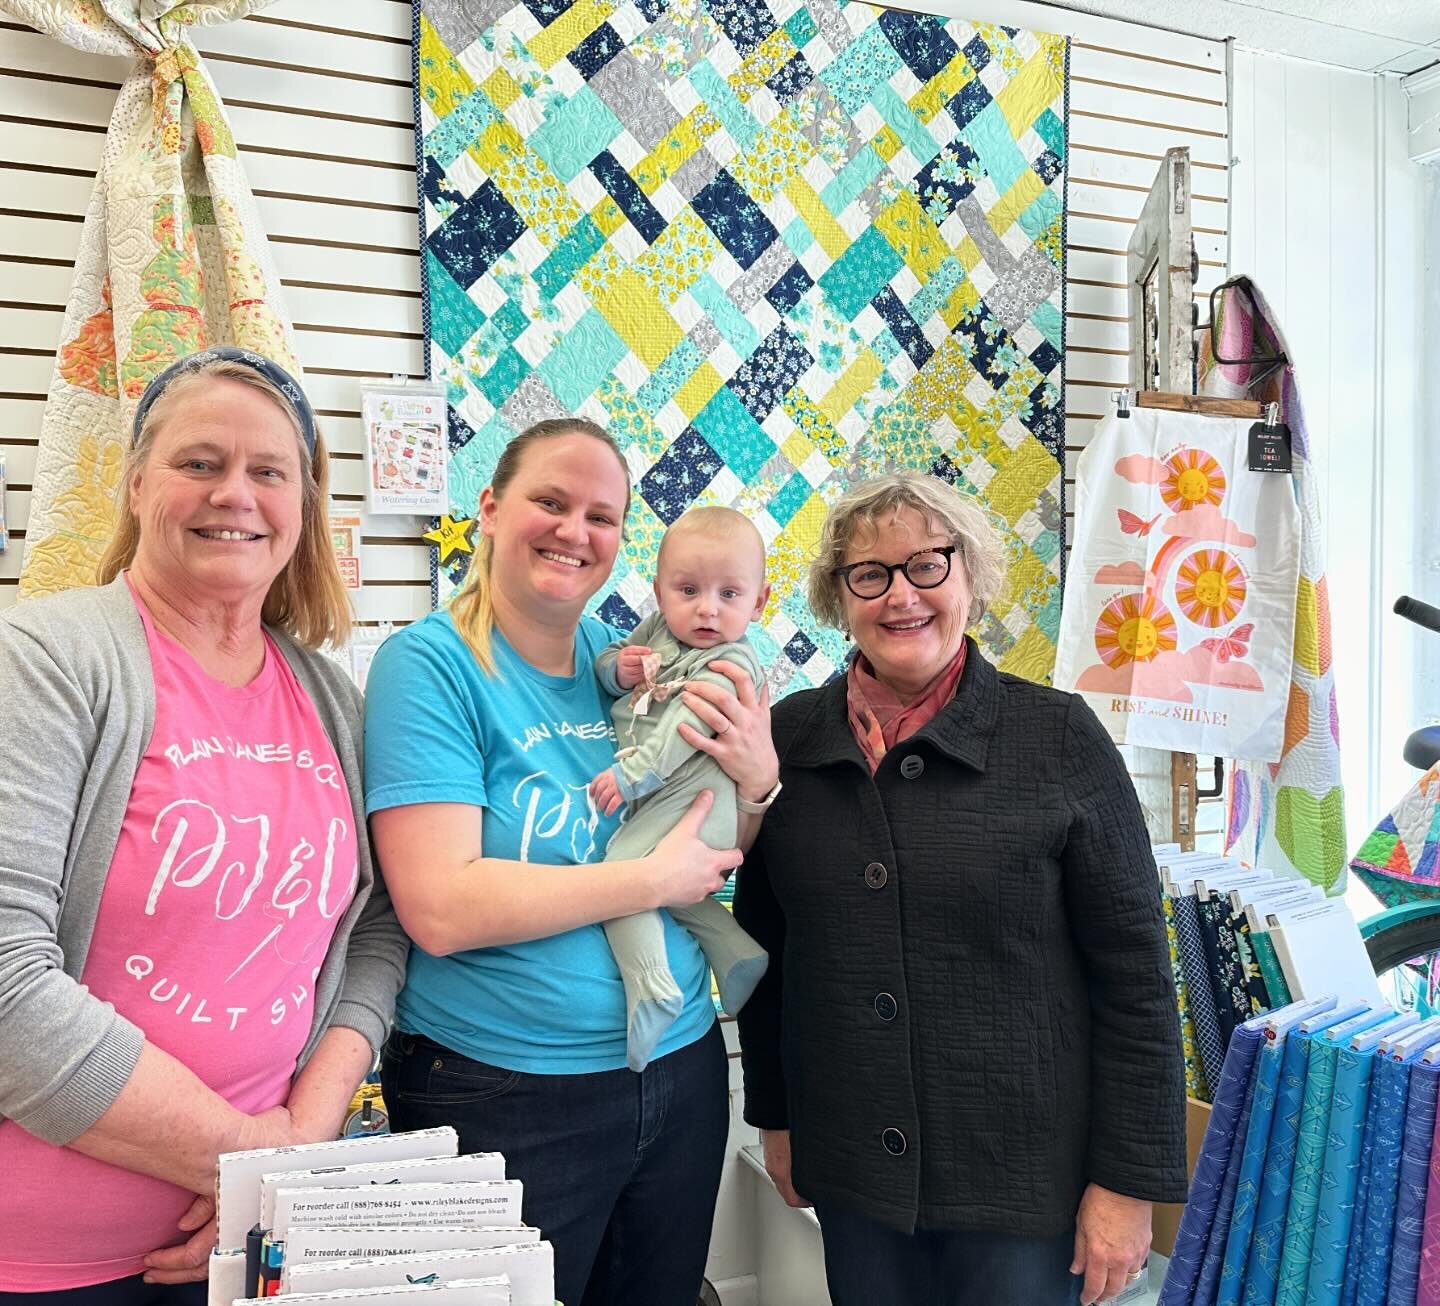 Kansas is a quilters paradise! Had the pleasure of stopping by @plainjanesandco in Leavenworth today and met mother-and-daughter team Jane and Beth. Such a delight! Their shop is cheerful, colorful, incredible selection of patterns, bundles, and kits